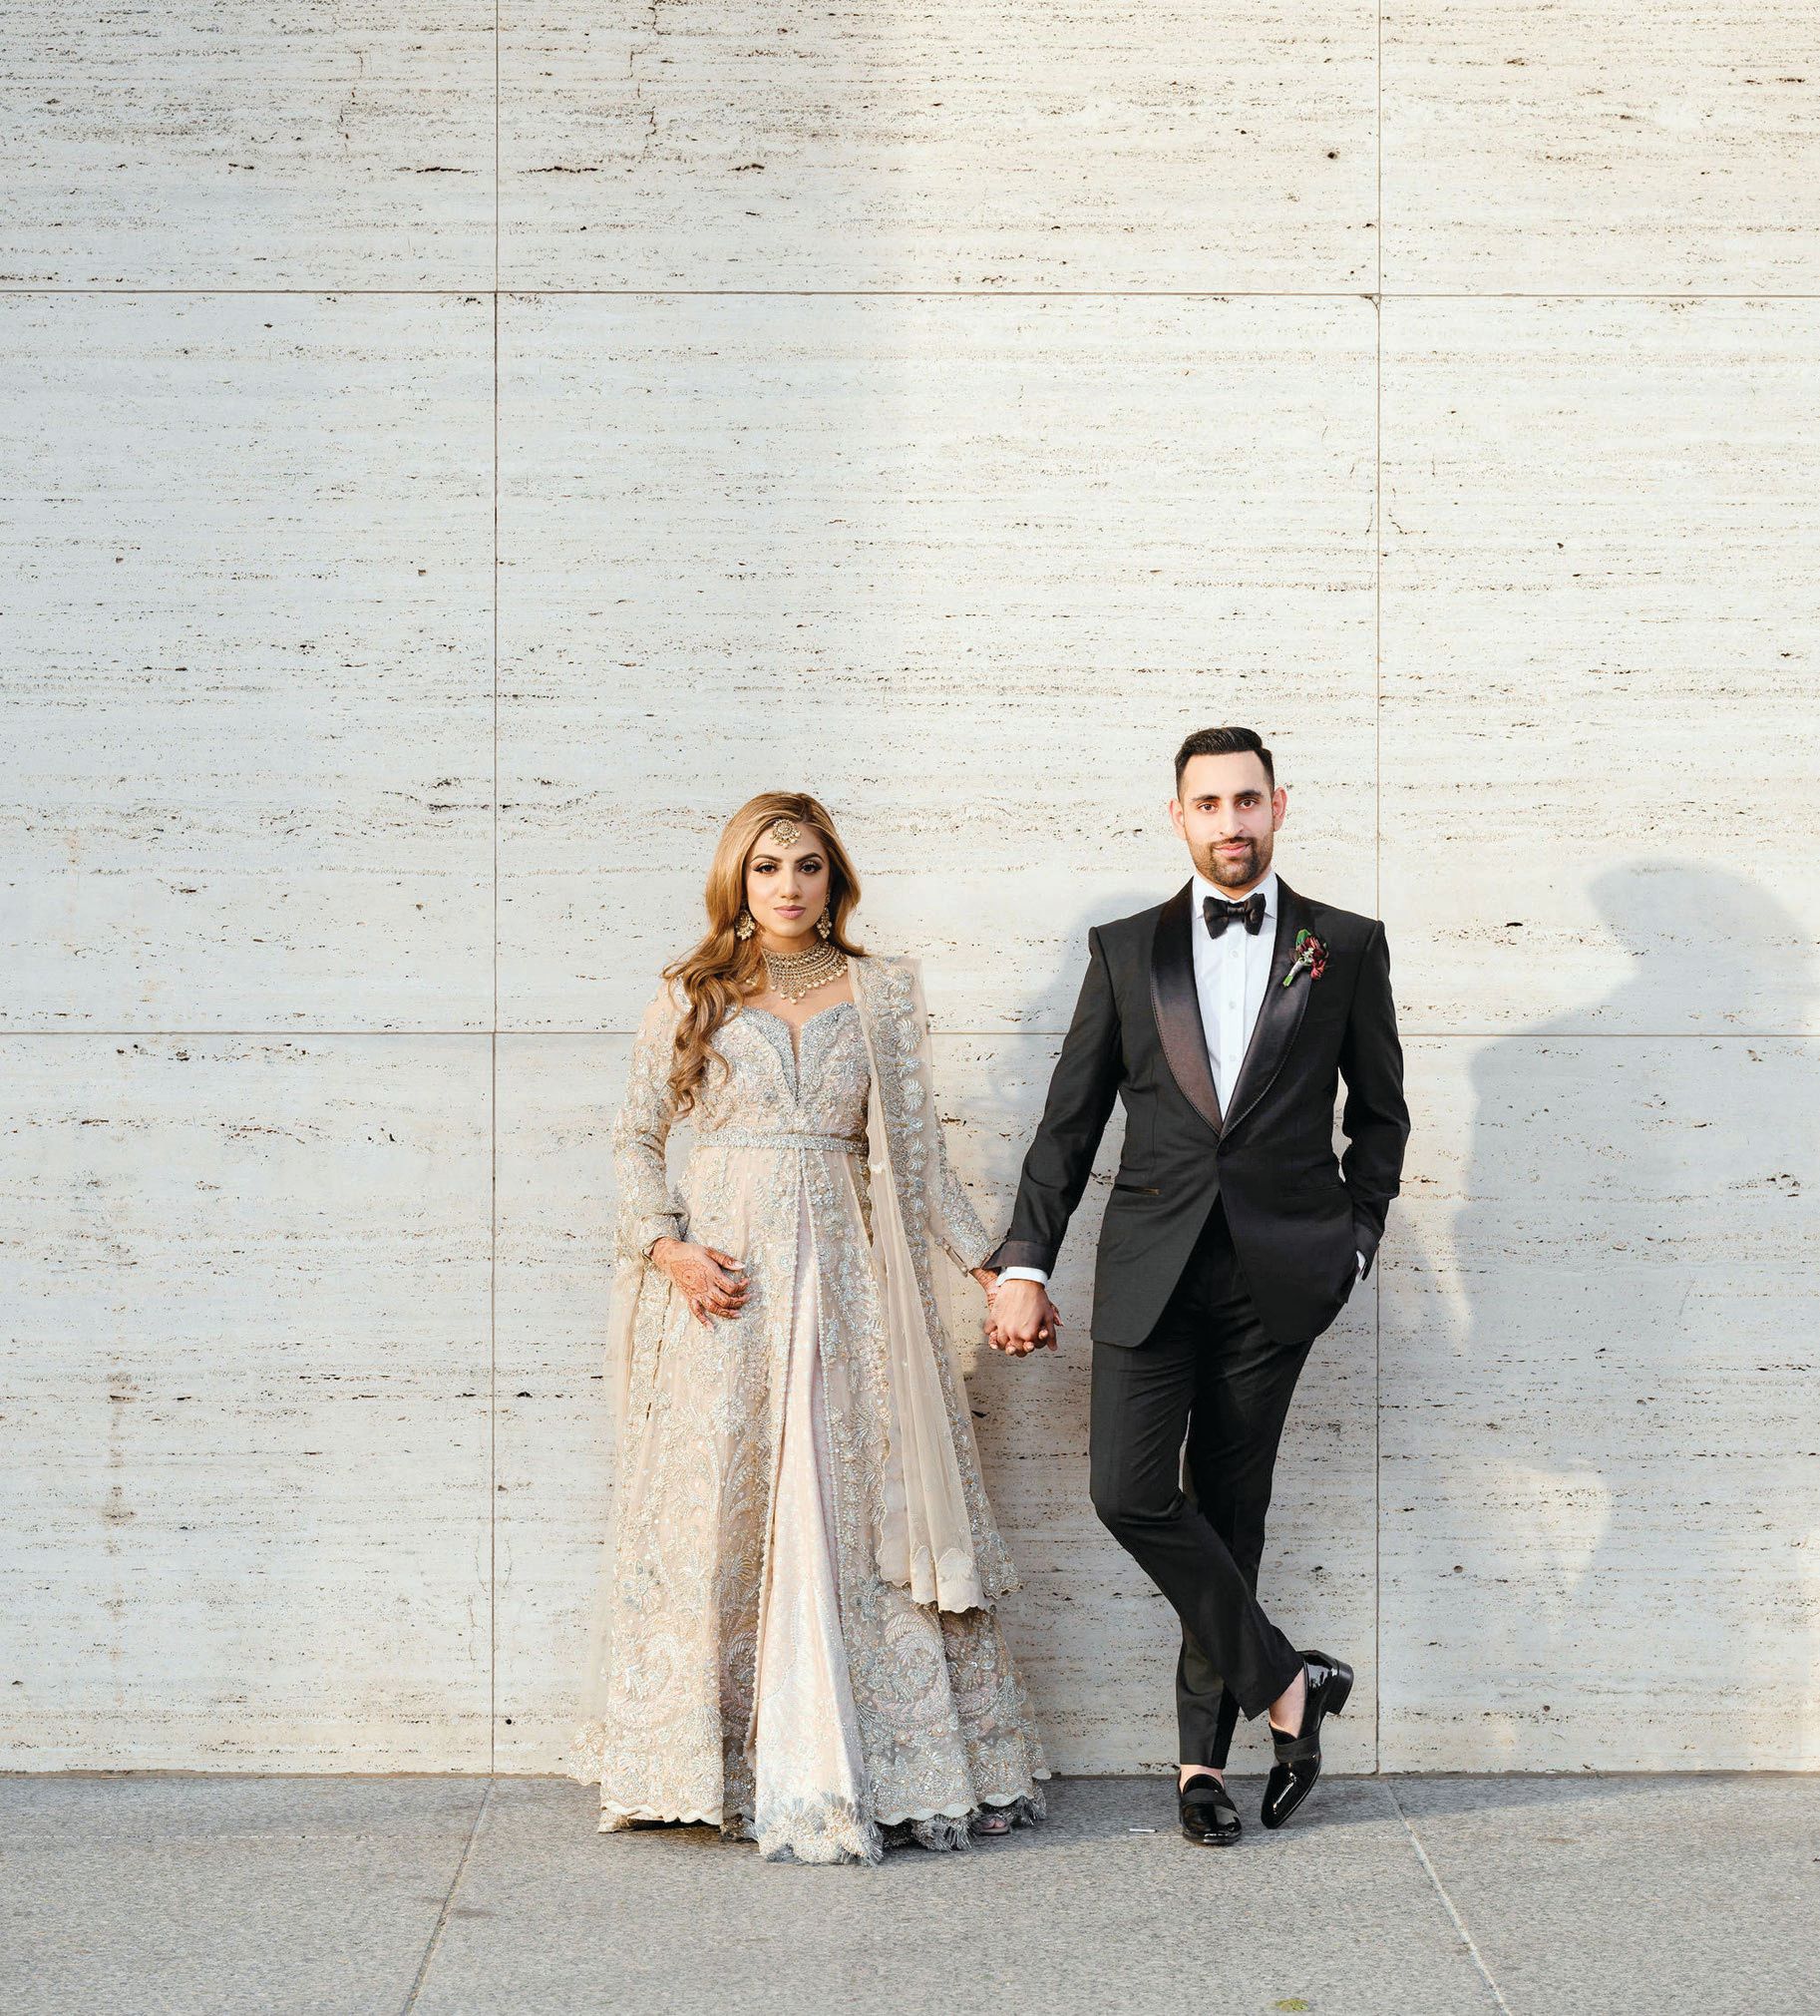 The couple posed for a portrait outside The Langham, Chicago, where the wedding party got ready. Photographed by IVASH Photography